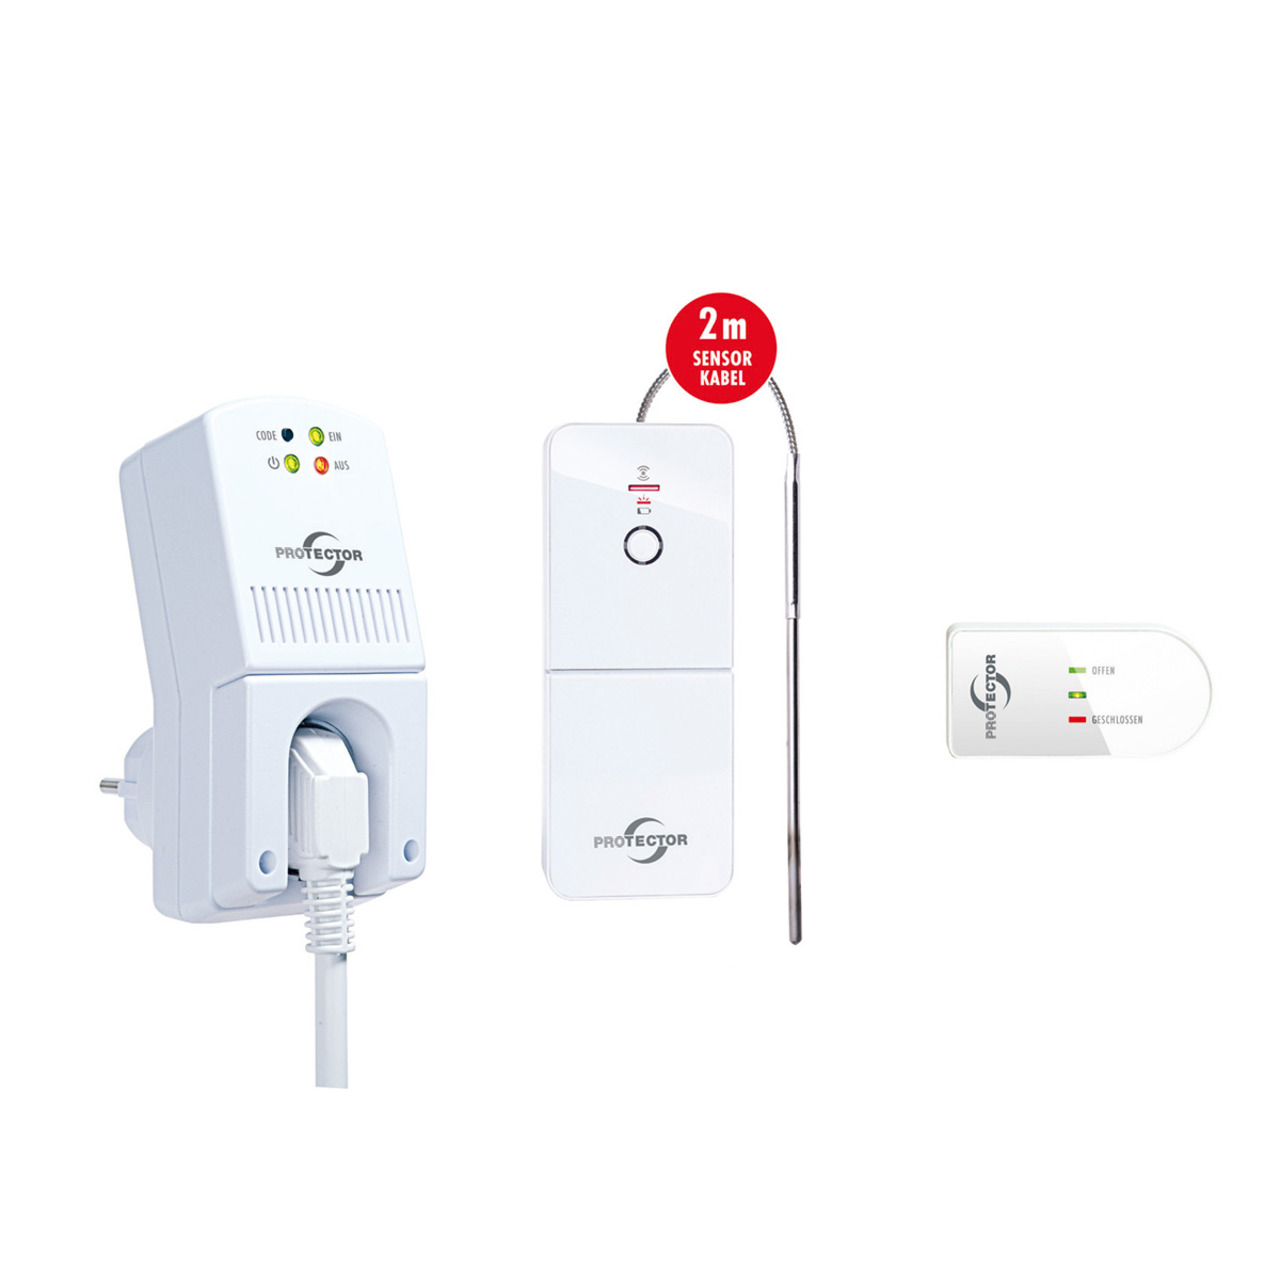 PROTECTOR AS-5030 Funk-Thermo-Abluftsteuerung mit Fenstersensor und Thermosensor- max- 1800 W